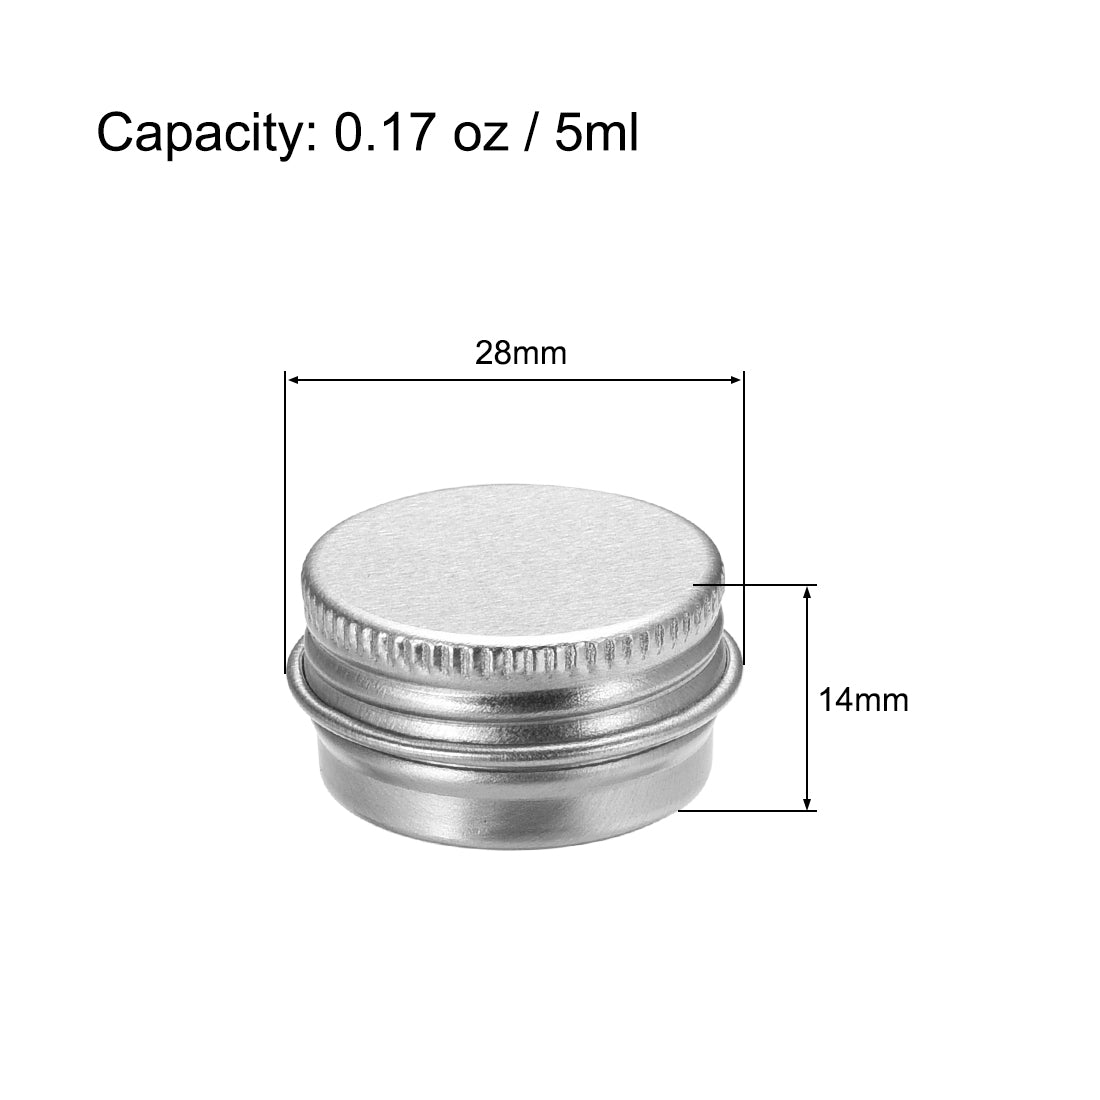 uxcell Uxcell 0.17 oz Round Aluminum Cans Tin Can Screw Top Metal Lid Containers 5ml, 3pcs